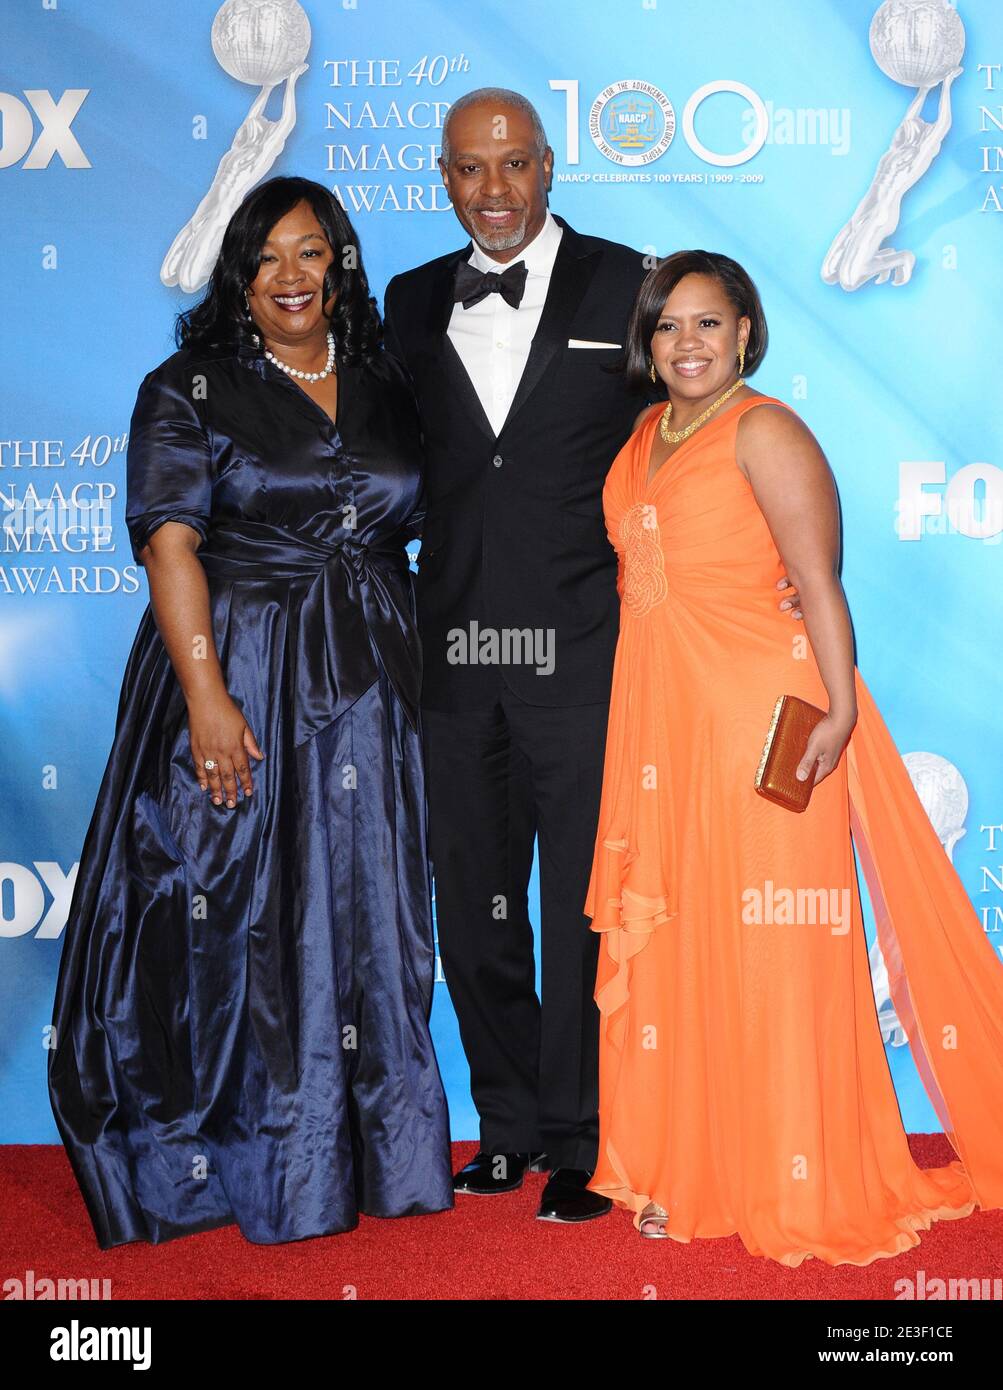 Shonda Rhimes, James Pickens Jr and Chandra Wilson attend the 40th NAACP Image Awards held at the Shrine Auditorium in Los Angeles, CA, USA on February 12, 2009. Photo by Lionel Hahn/ABACAPRESS.COM Stock Photo